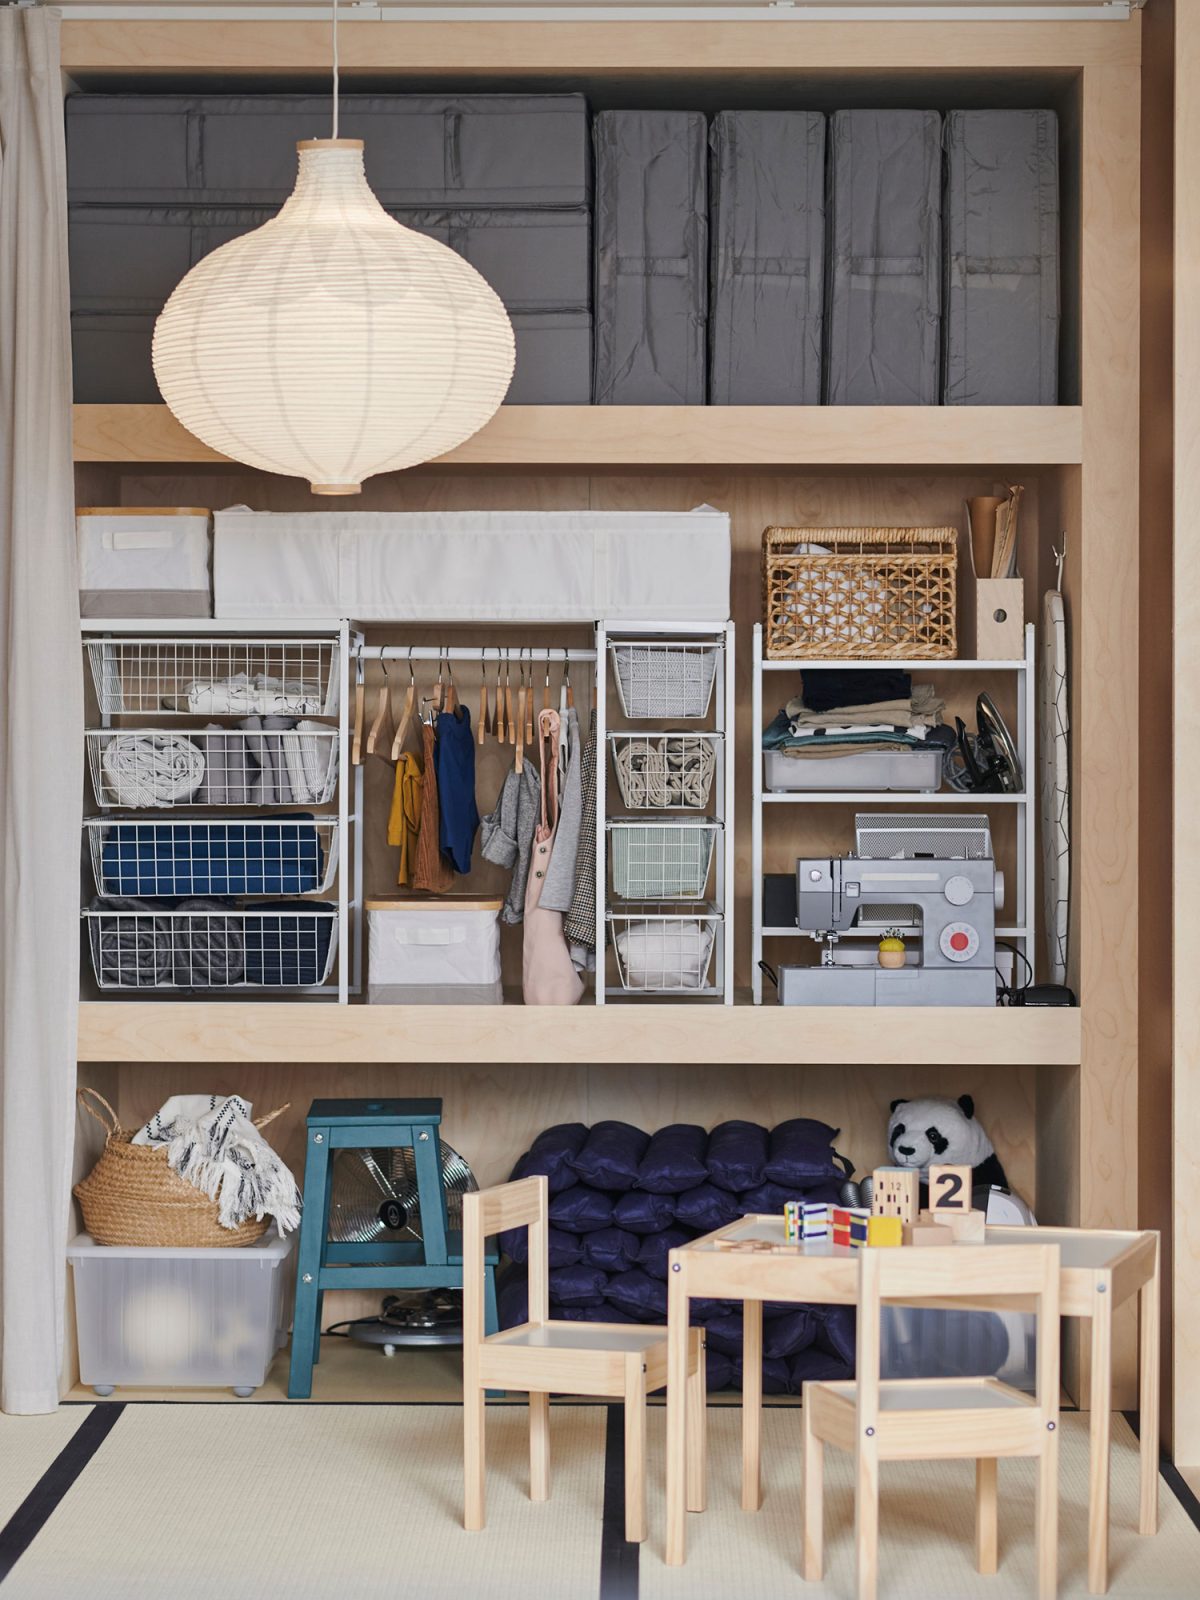 Large deep wardrobe, neatly organised with storage boxes and metal baskets, a large rice paper lamp in the foreground.